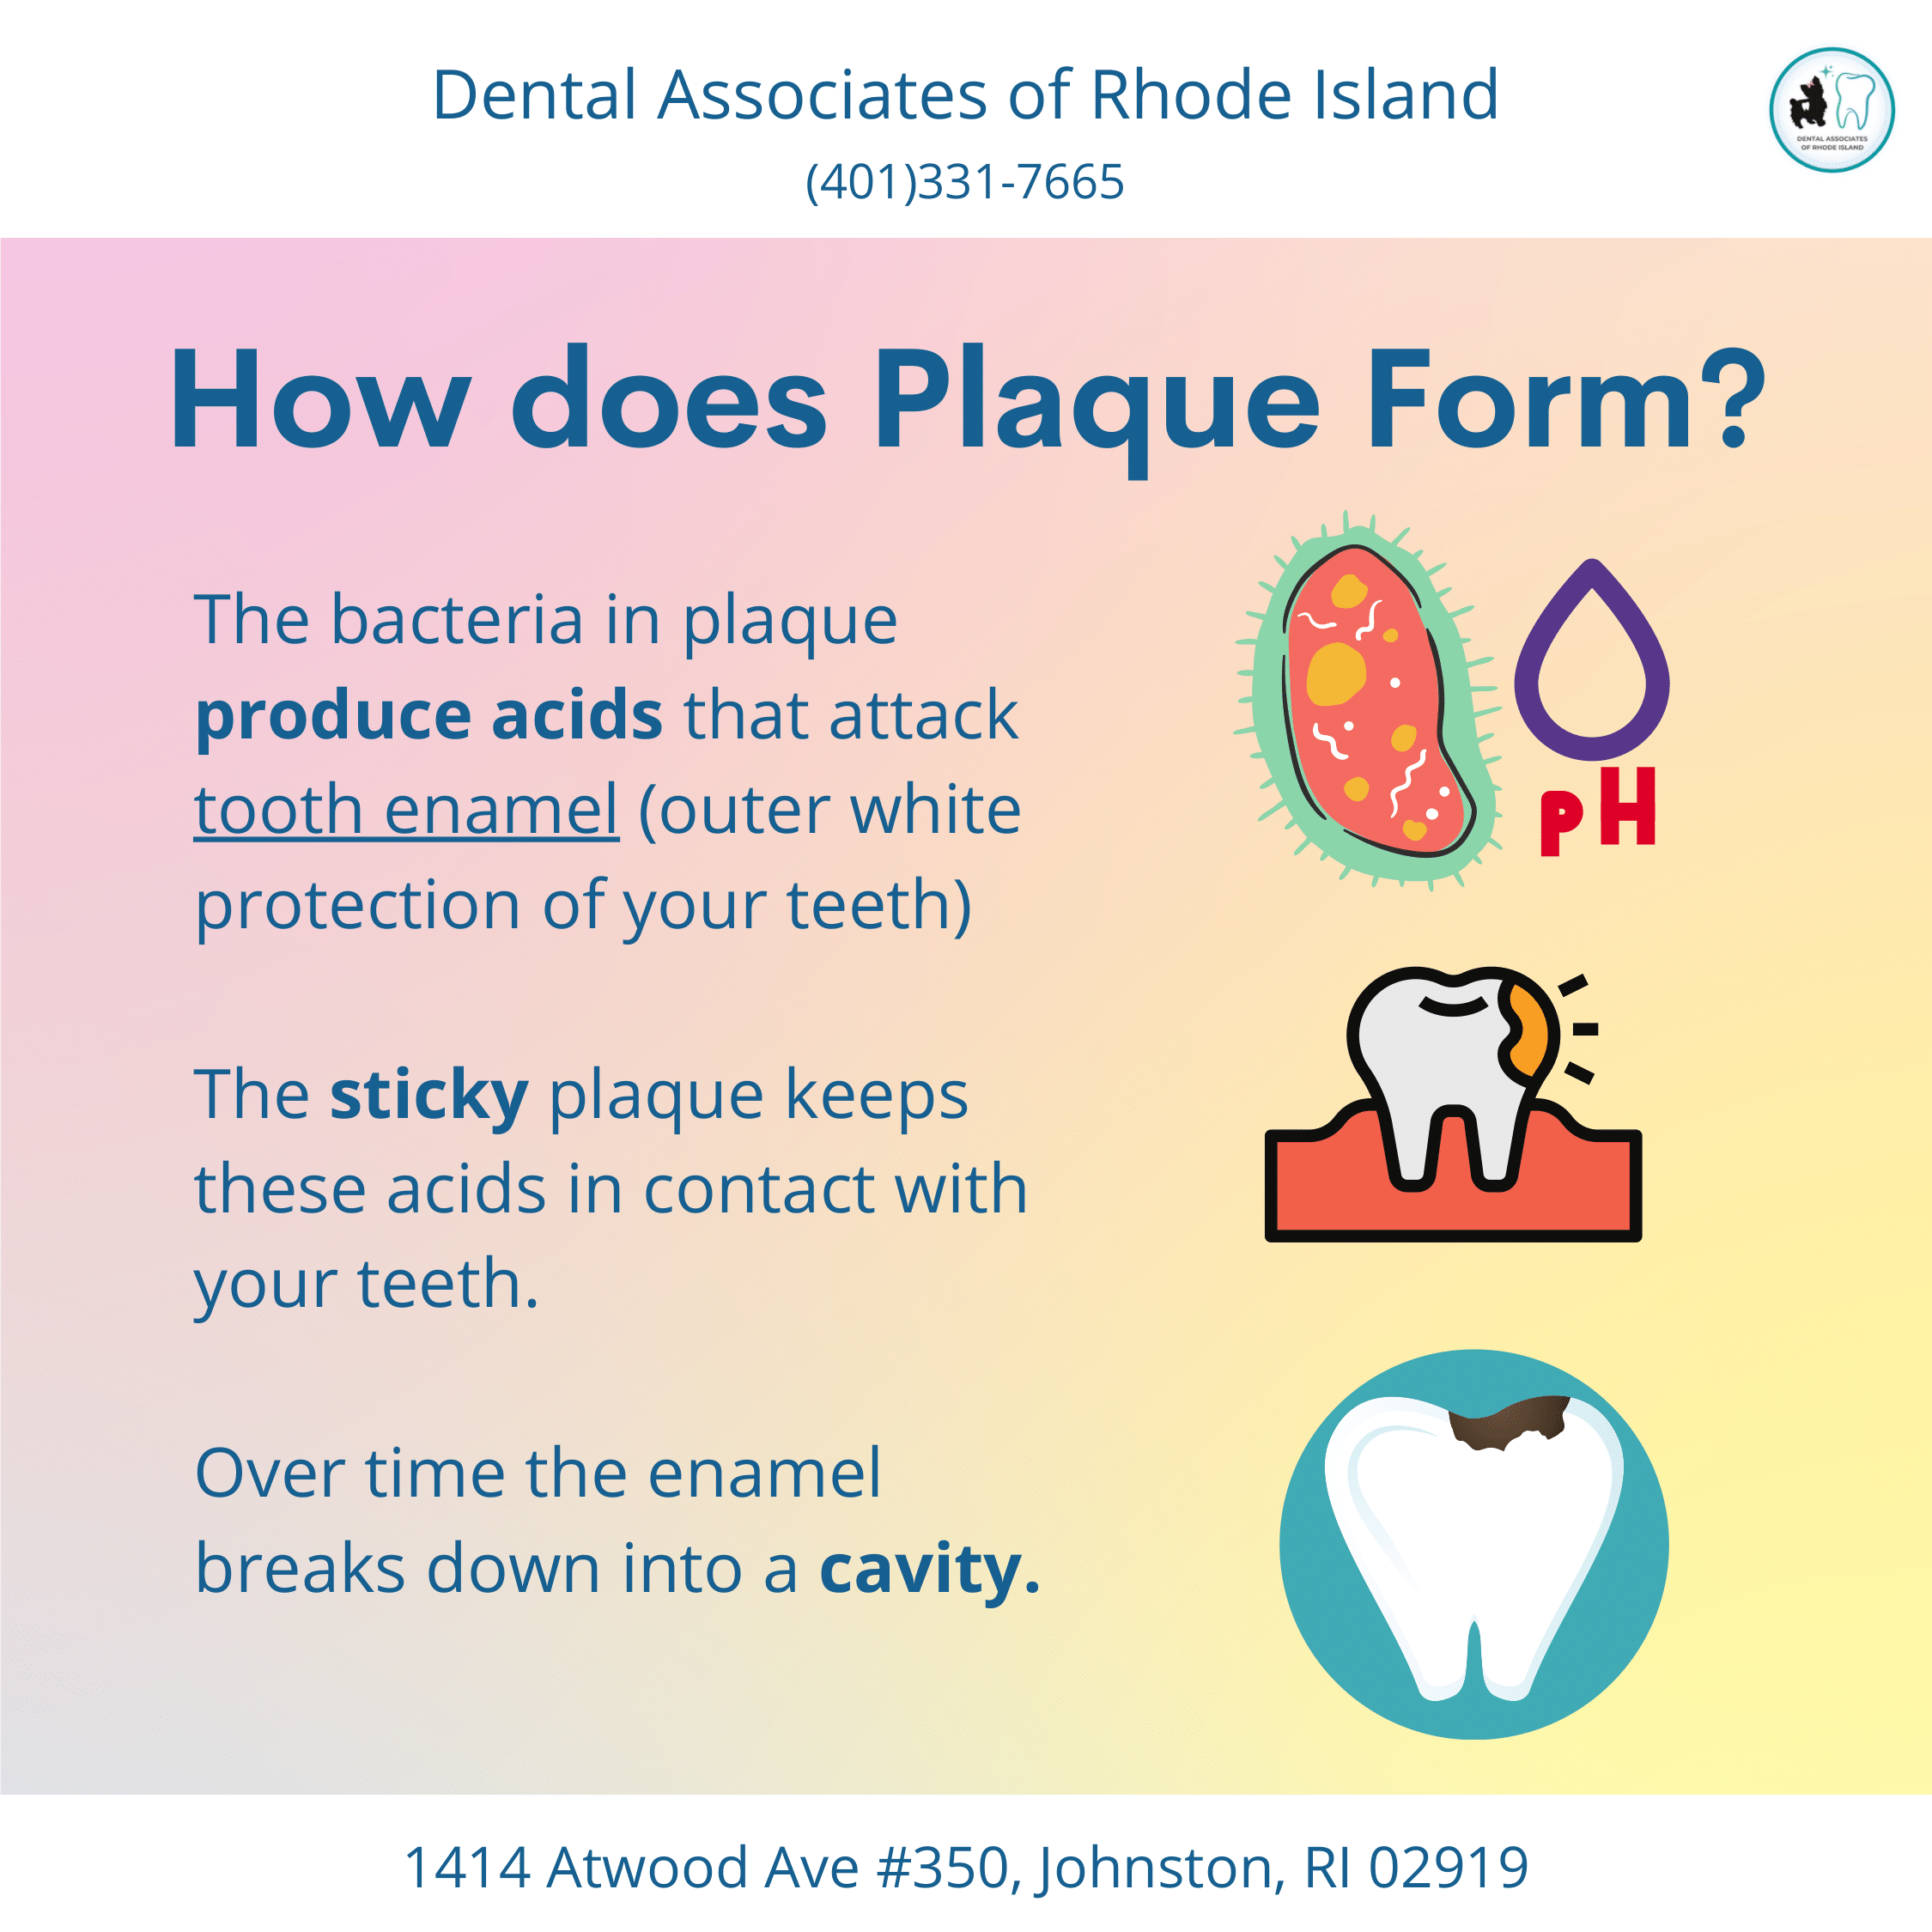 How Does Plaque Form?